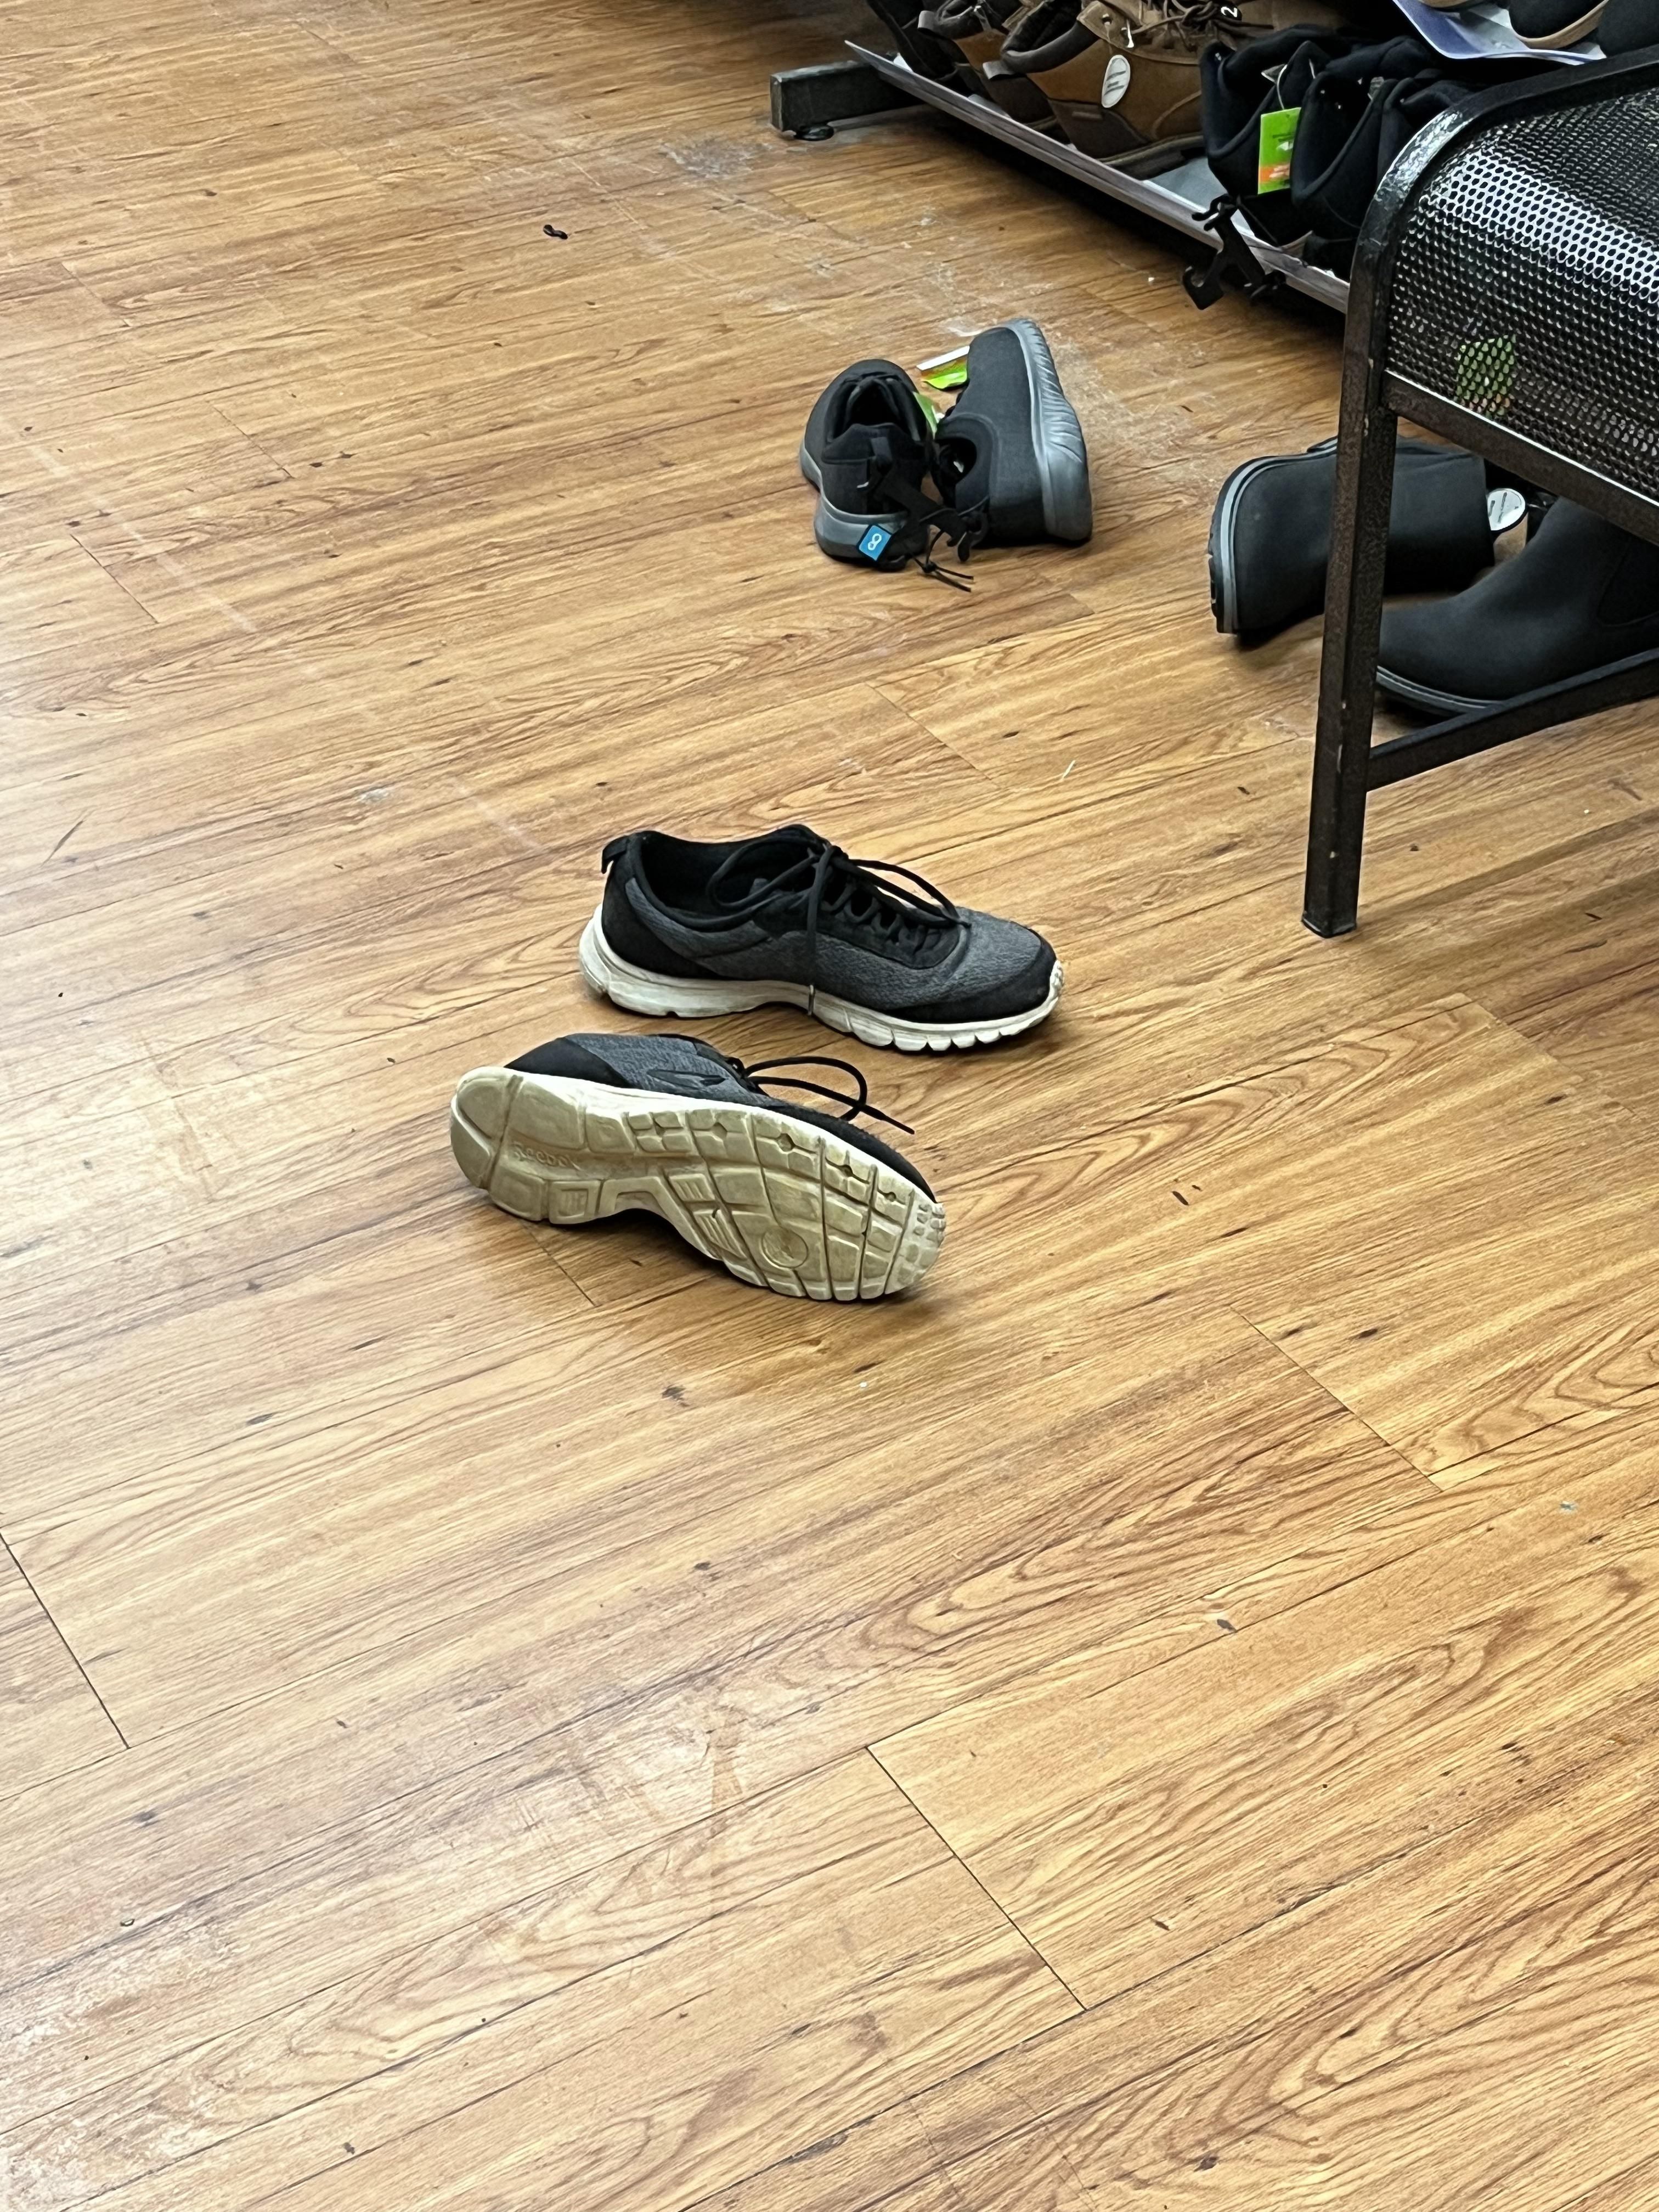 Saw a guy change his shoes out for a new pair and walk out.